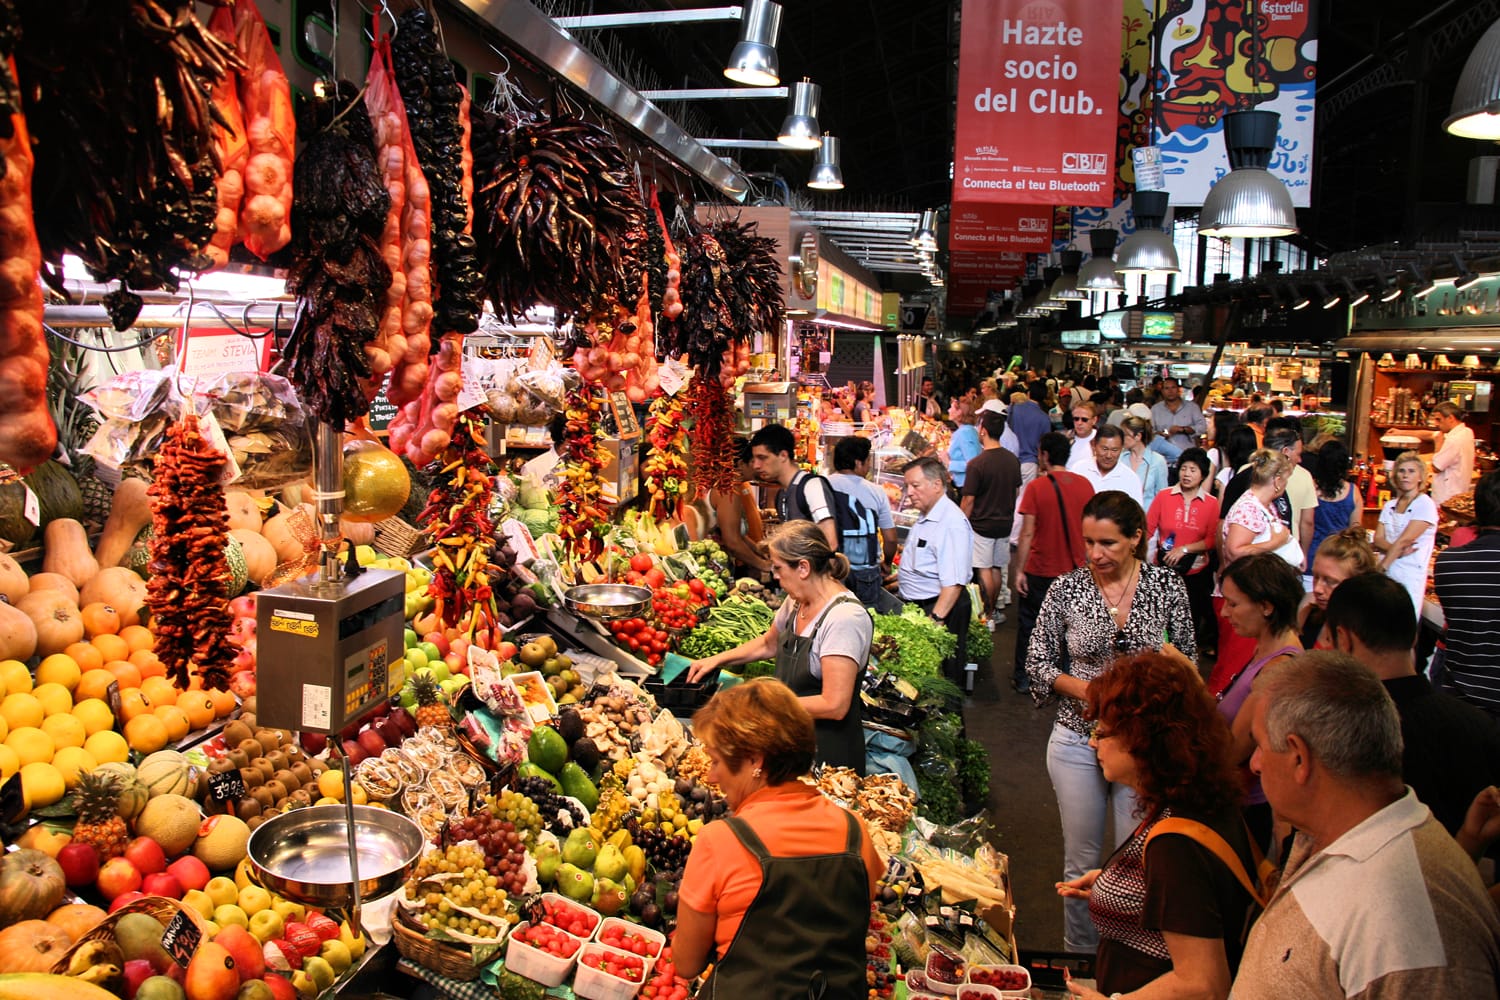 Tourists in famous La Boqueria market in Barcelona. One of the oldest markets in Europe that still exist. Established 1217.